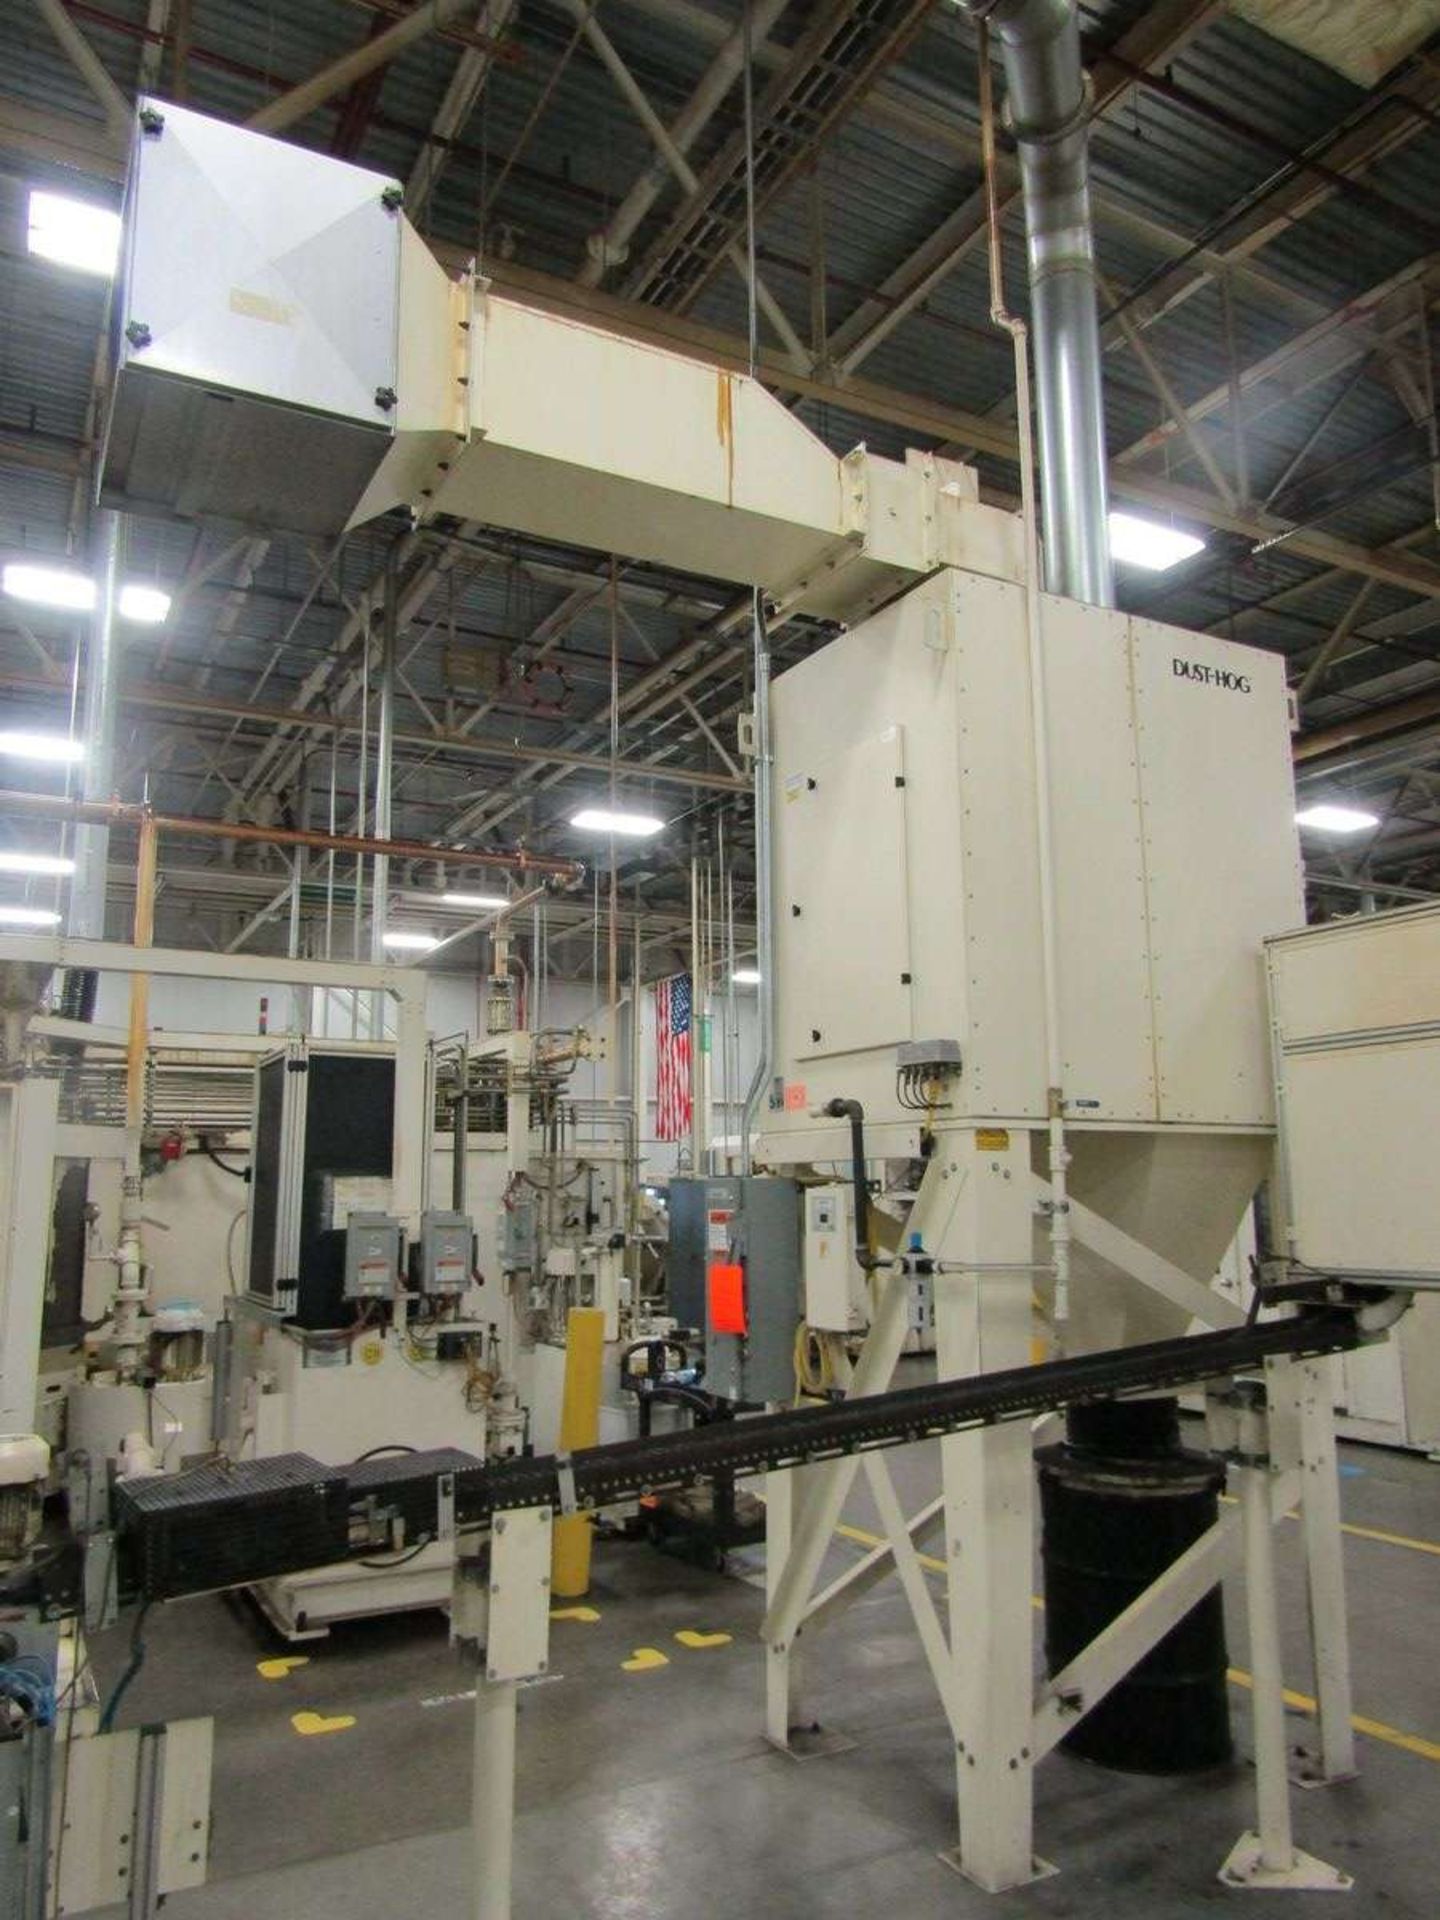 2002 United Air Specialists Inc. SBS4 "Dust Hog" 4-Bag Dust Collector - Image 2 of 5